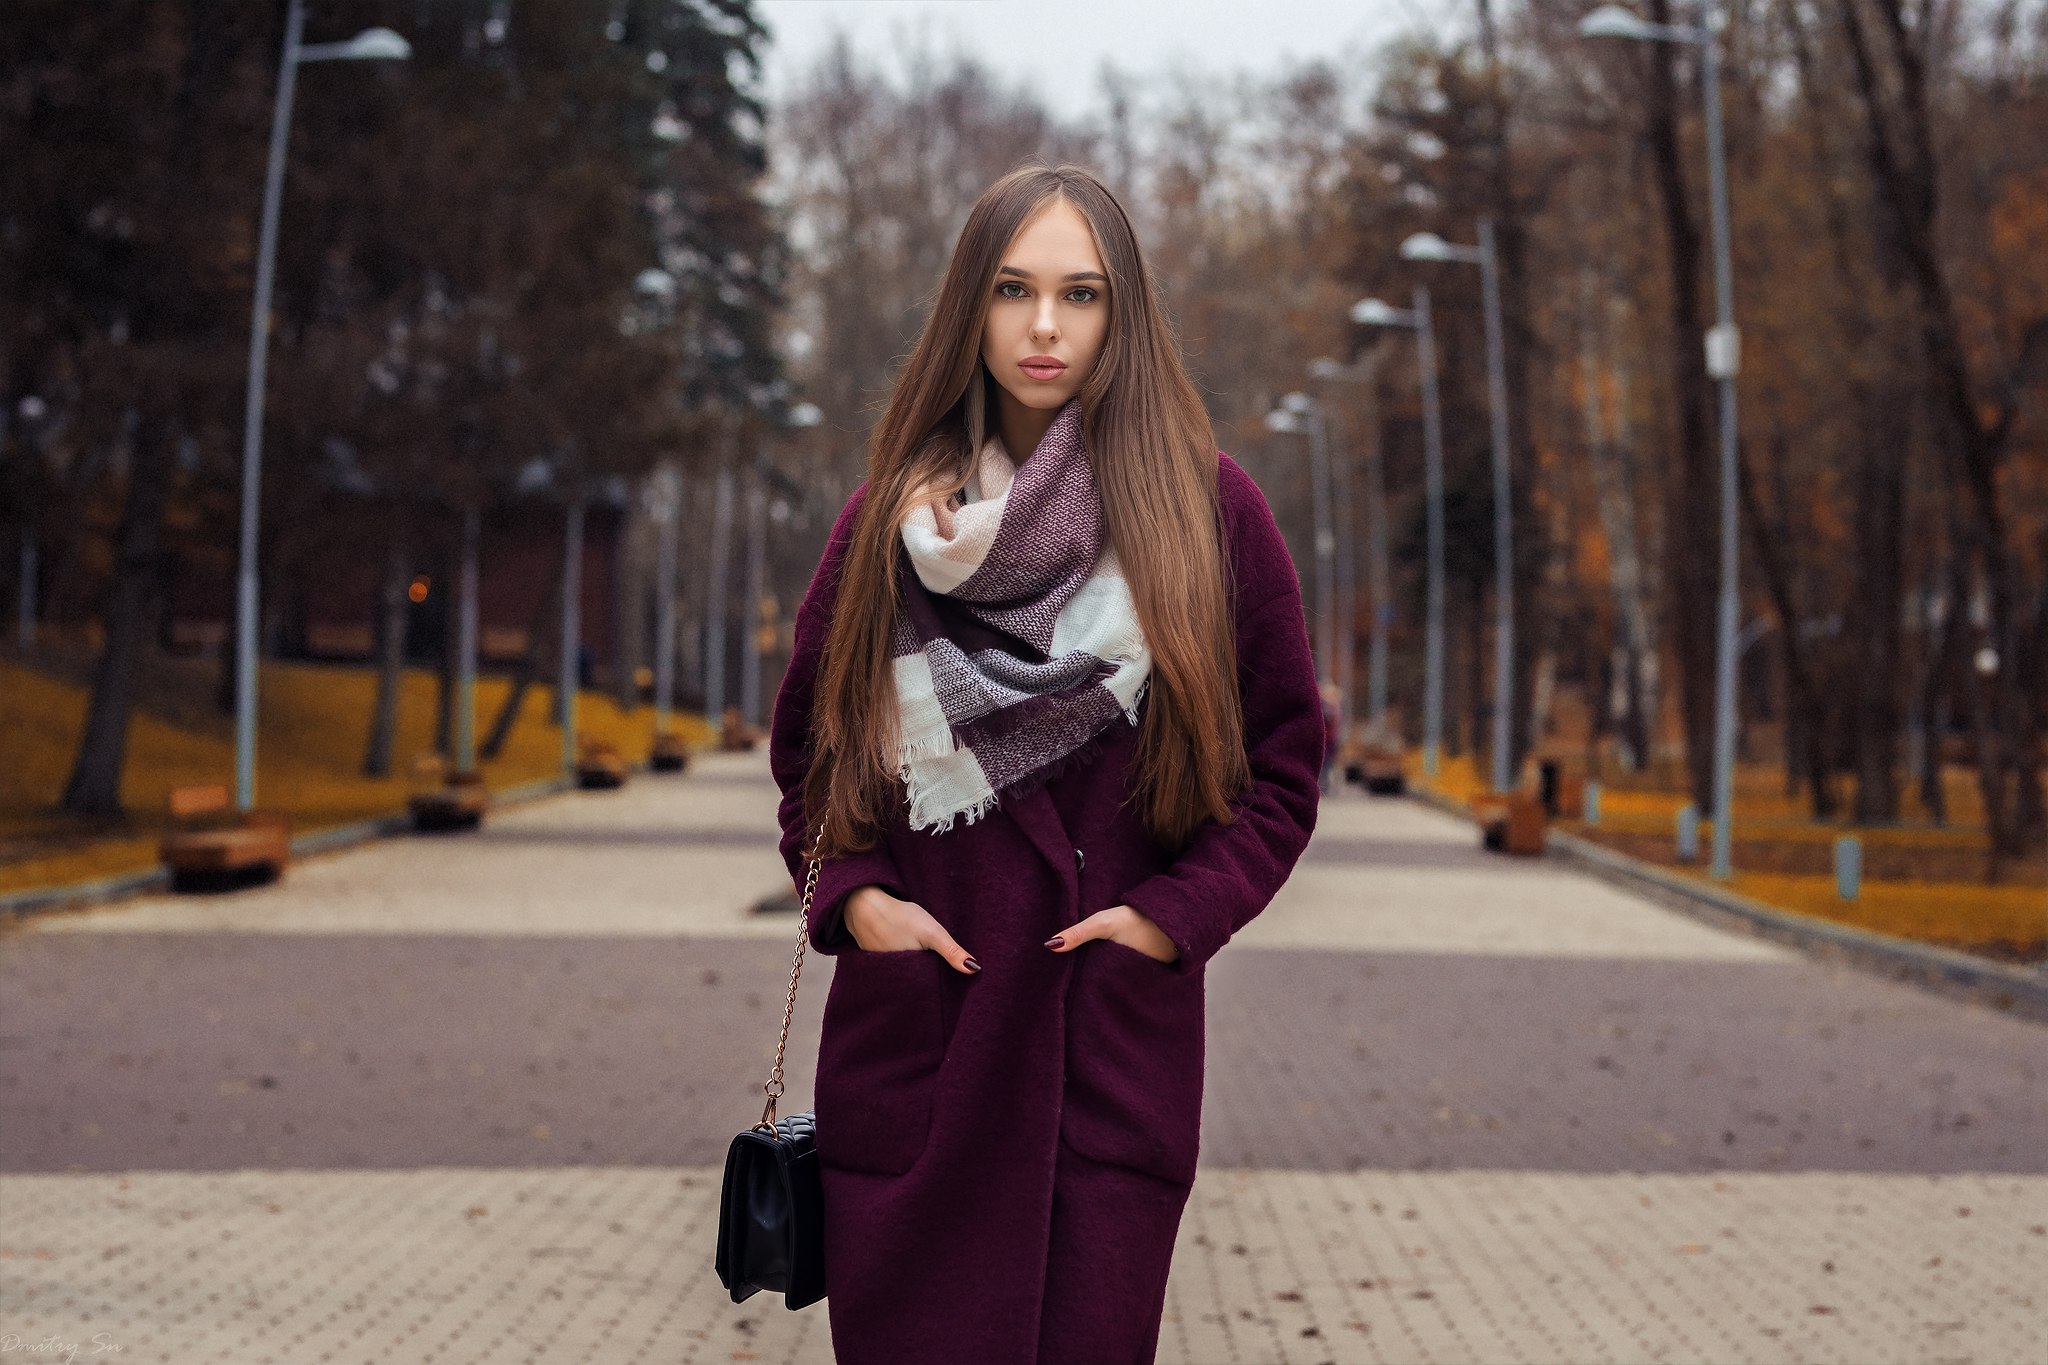 Women Outdoors Women Long Hair Model Coats Scarf Straight Hair Looking At Viewer Maria Hands In Pock 2048x1365